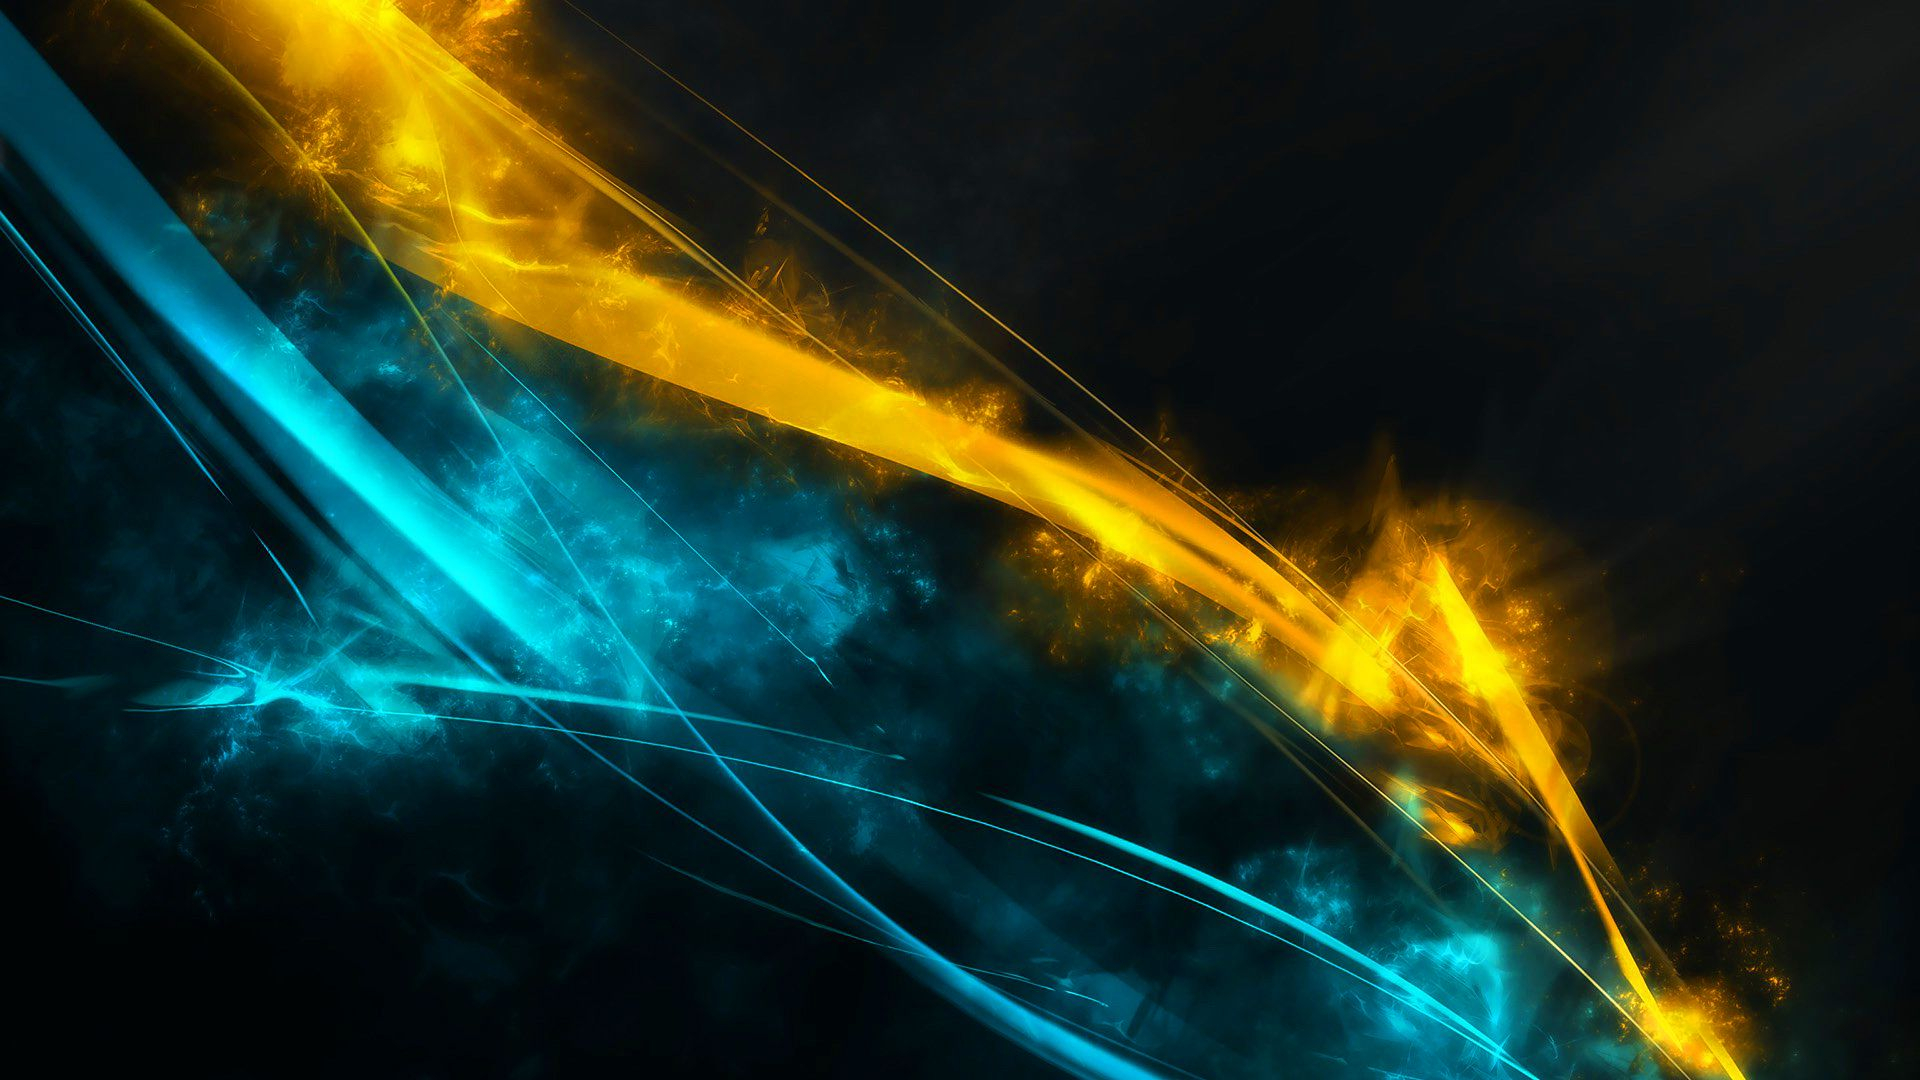 1920x1080 blue and yellow : wallpapers | Yellow wallpaper, Blue wallpapers, Blue and gold wallpaper